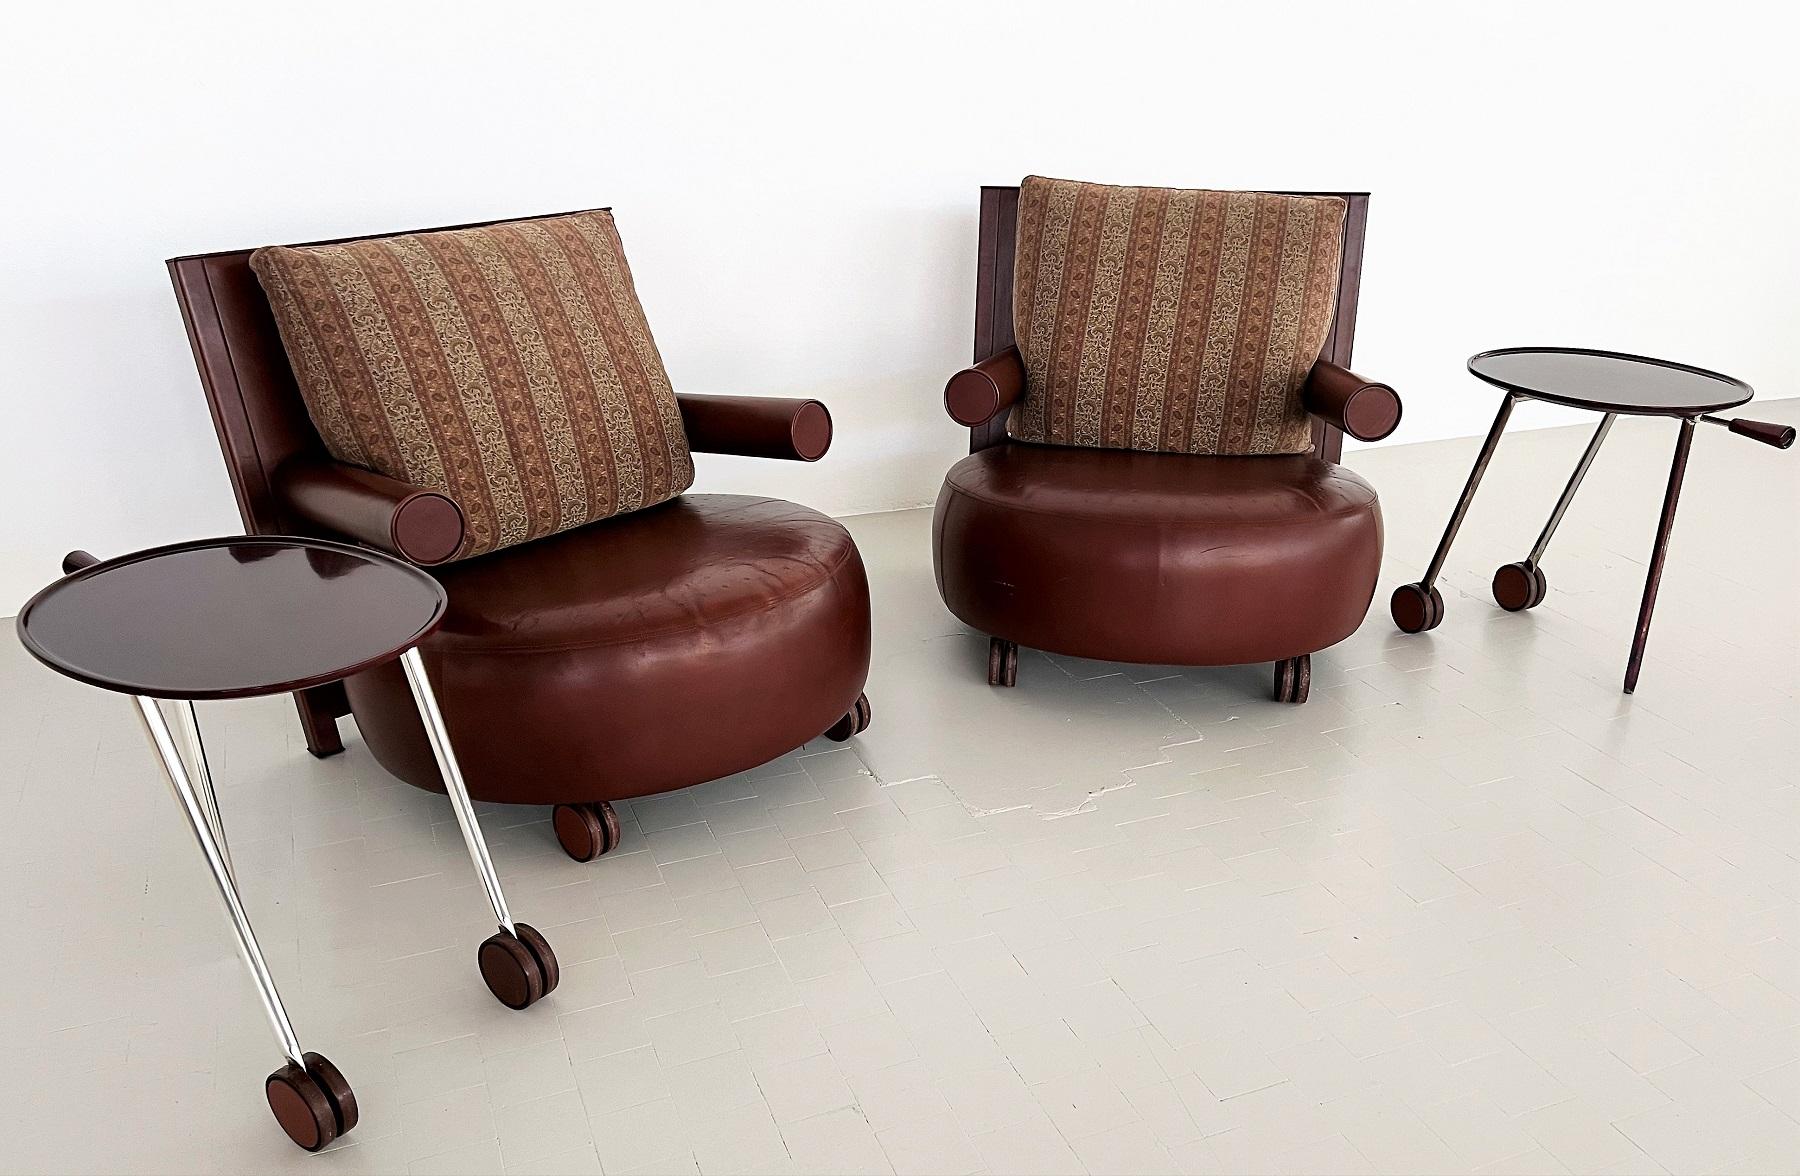 Wonderful lounge chair set of the extra class, consisting of 2 extra large lounge chairs and two matching rolling tables.
Designed by designer Antonio Citterio and manufactured in the 80s by B&B Italia.
The XXL lounge chairs are made of thick